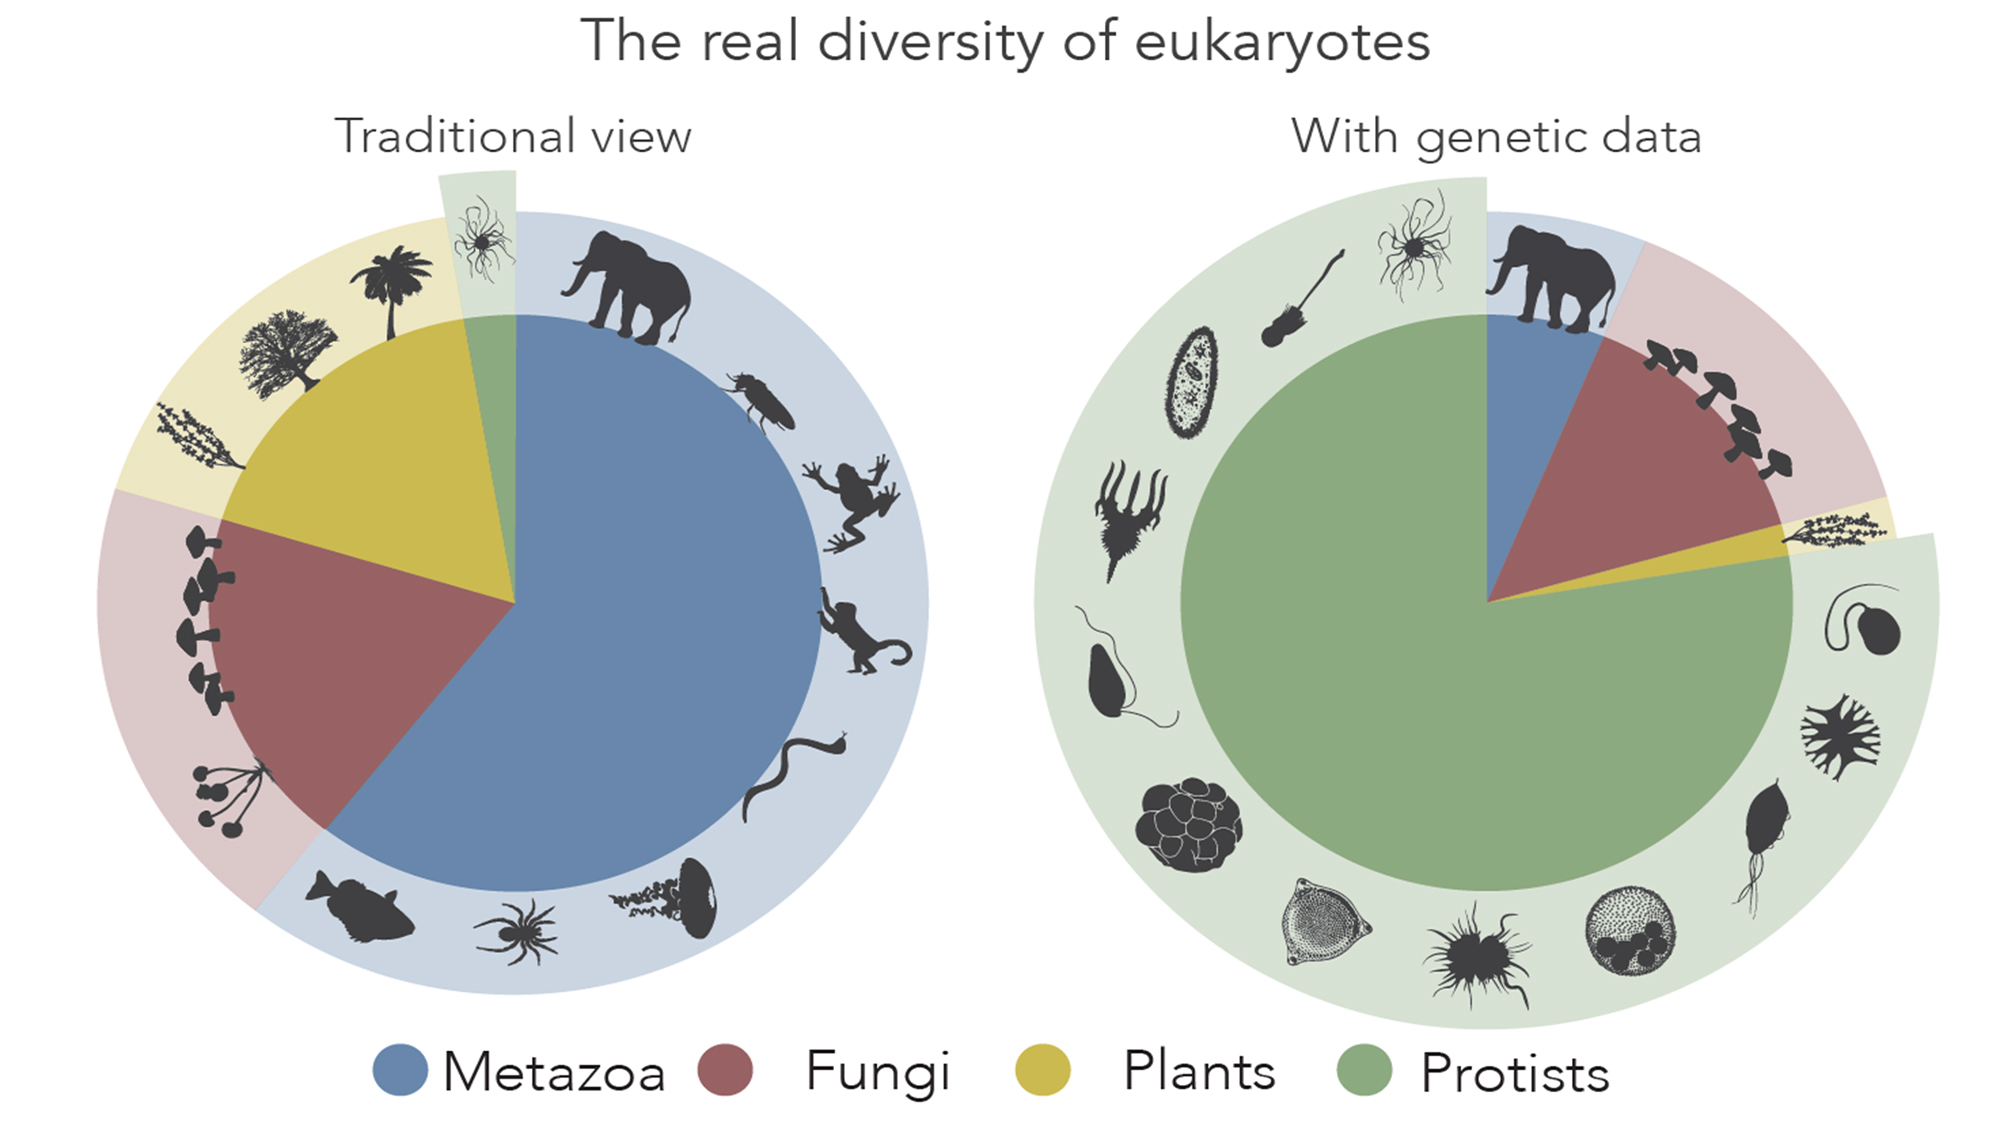 The other eukaryotes